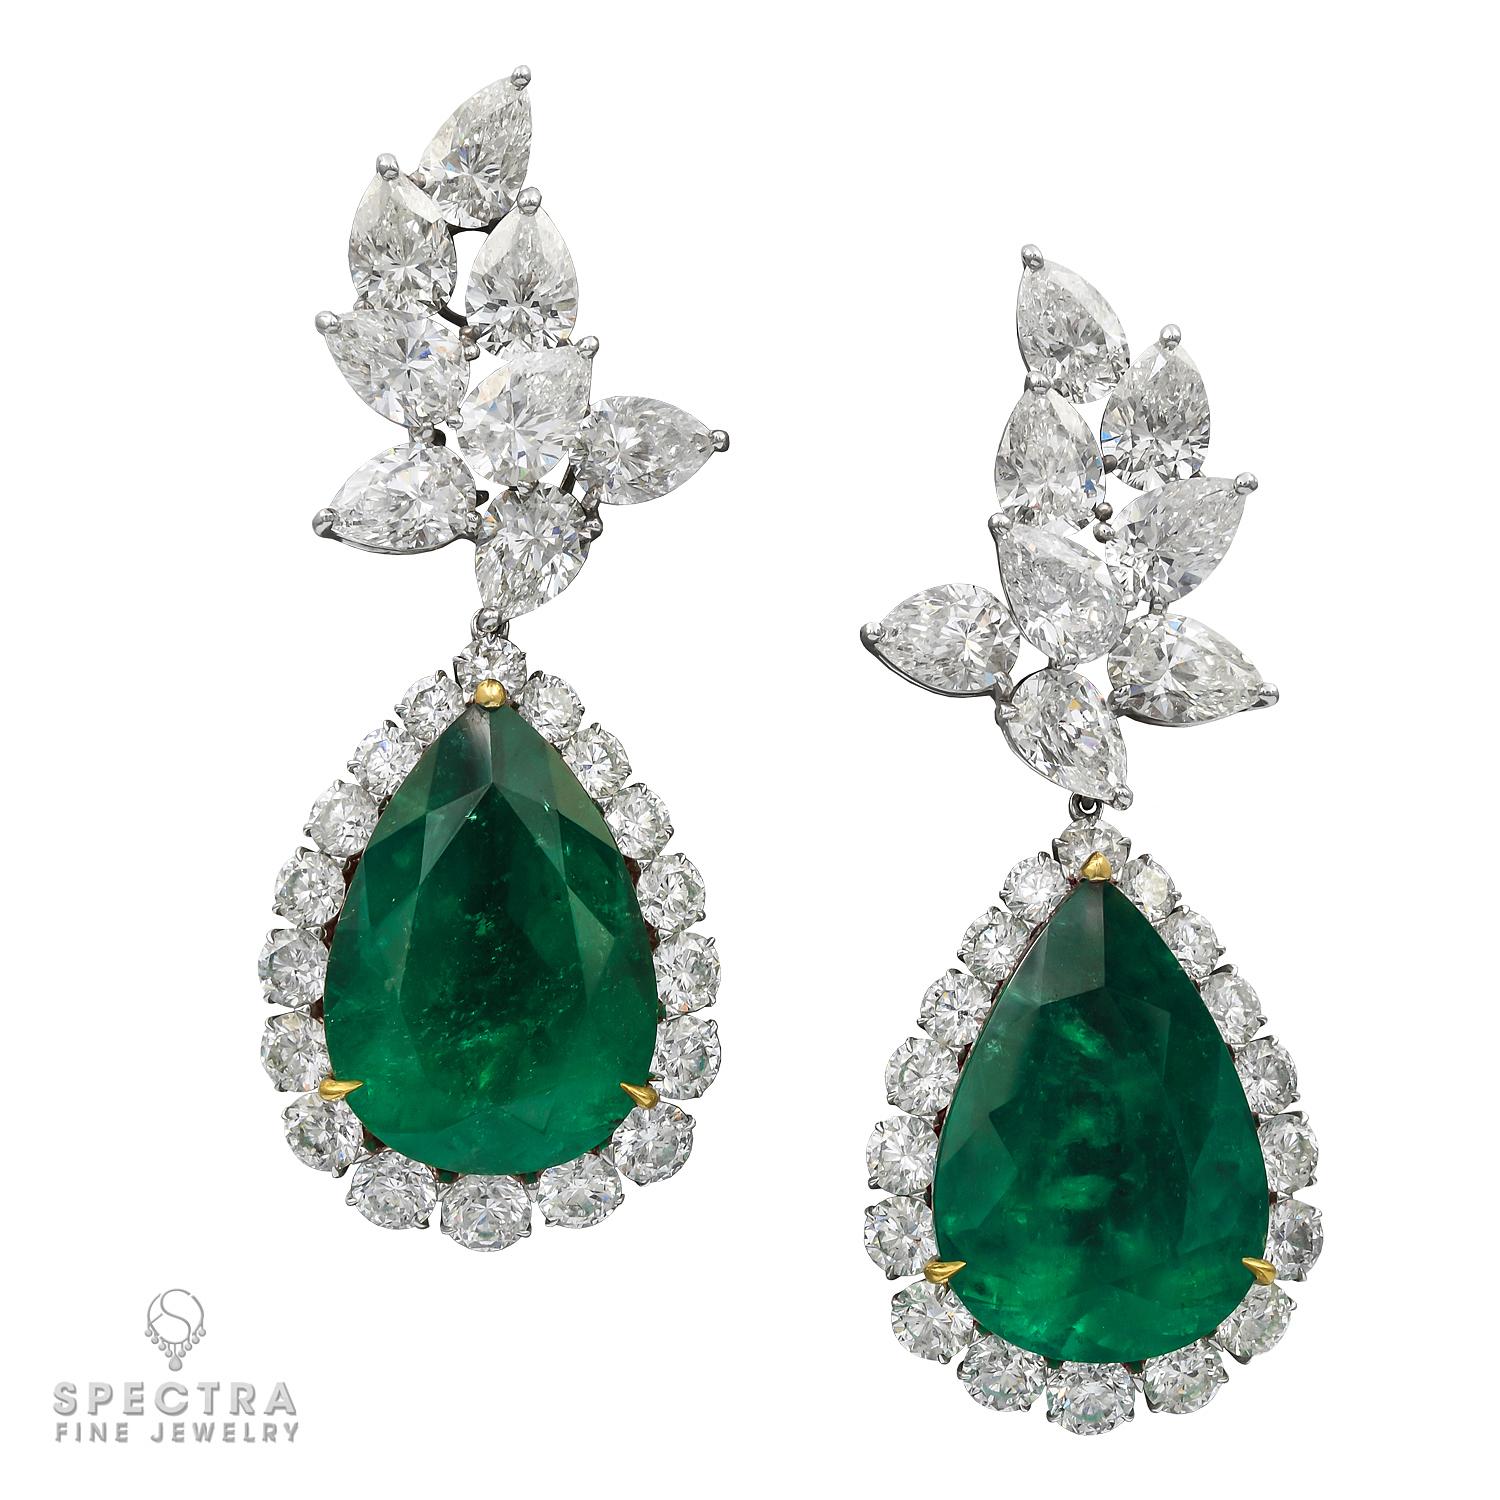 A beautiful pair of important earrings featuring two pear-shape green emeralds and diamonds.
The emeralds are certified by C. Dunaigre lab, stating that the weight of each is 22.23 carats and 24.84 carats, Colombian with minor clarity enhancement.